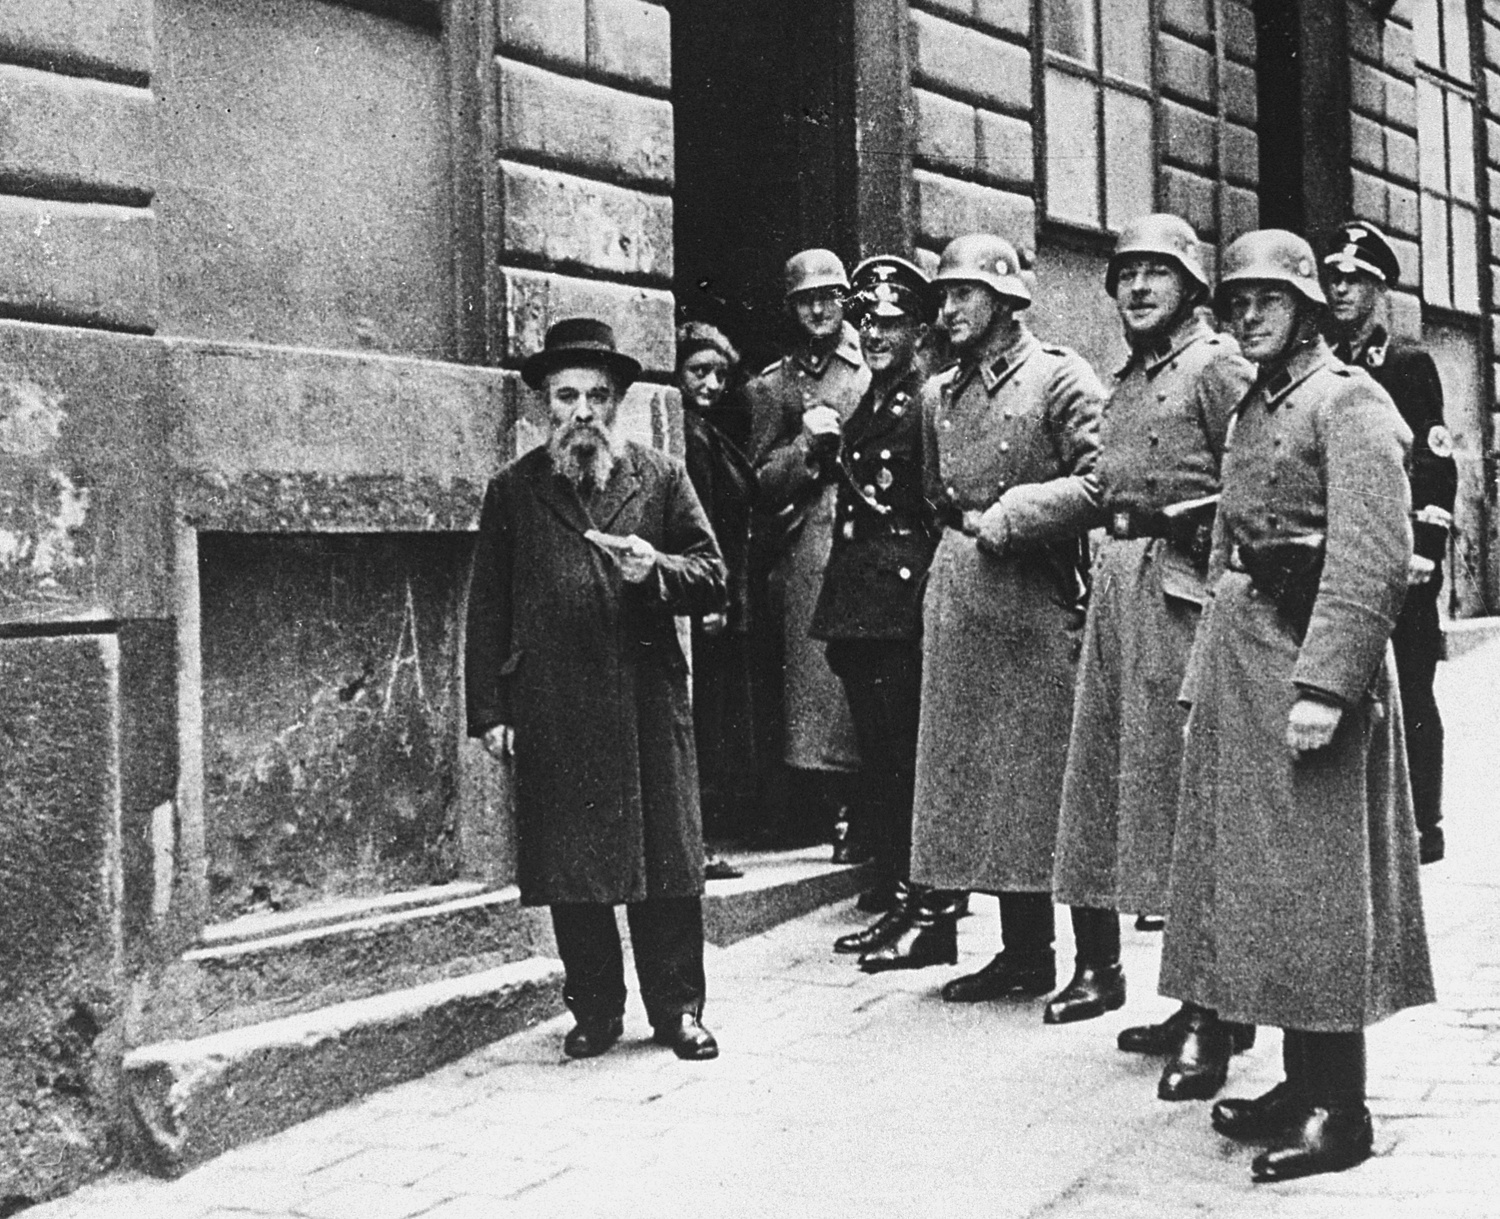 An elderly Jewish man and Gestapo officers and troops, Germany, late 1930s.